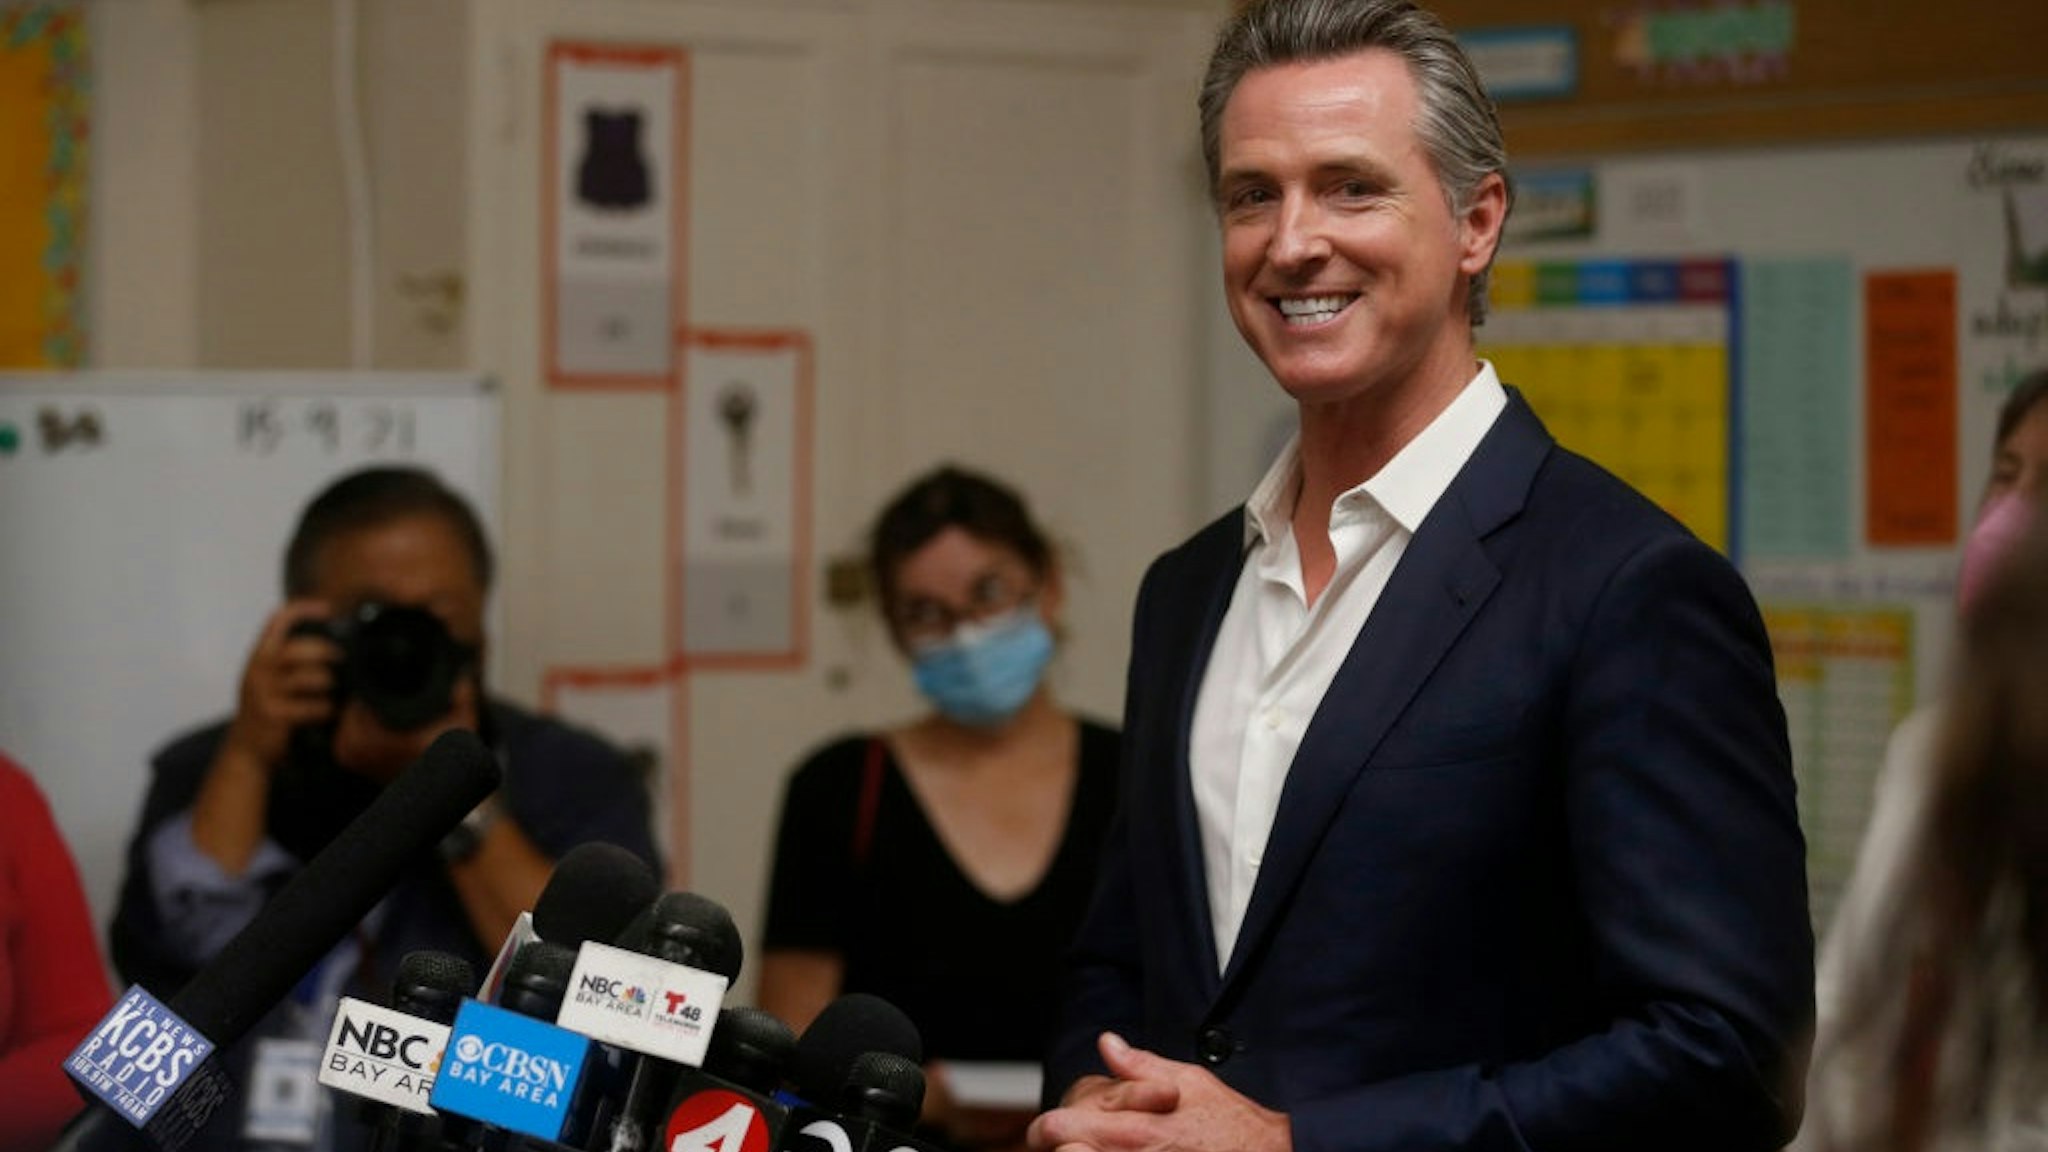 OAKLAND, CALIFORNIA - SEPTEMBER 15: Gov. Gavin Newsom speaks to the press while visiting Melrose Leadership Academy in Oakland, Calif., on Wednesday, Sept. 15, 2021. On Tuesday, Newsom prevailed in the California Gubernatorial Recall Election to keep his post as governor.